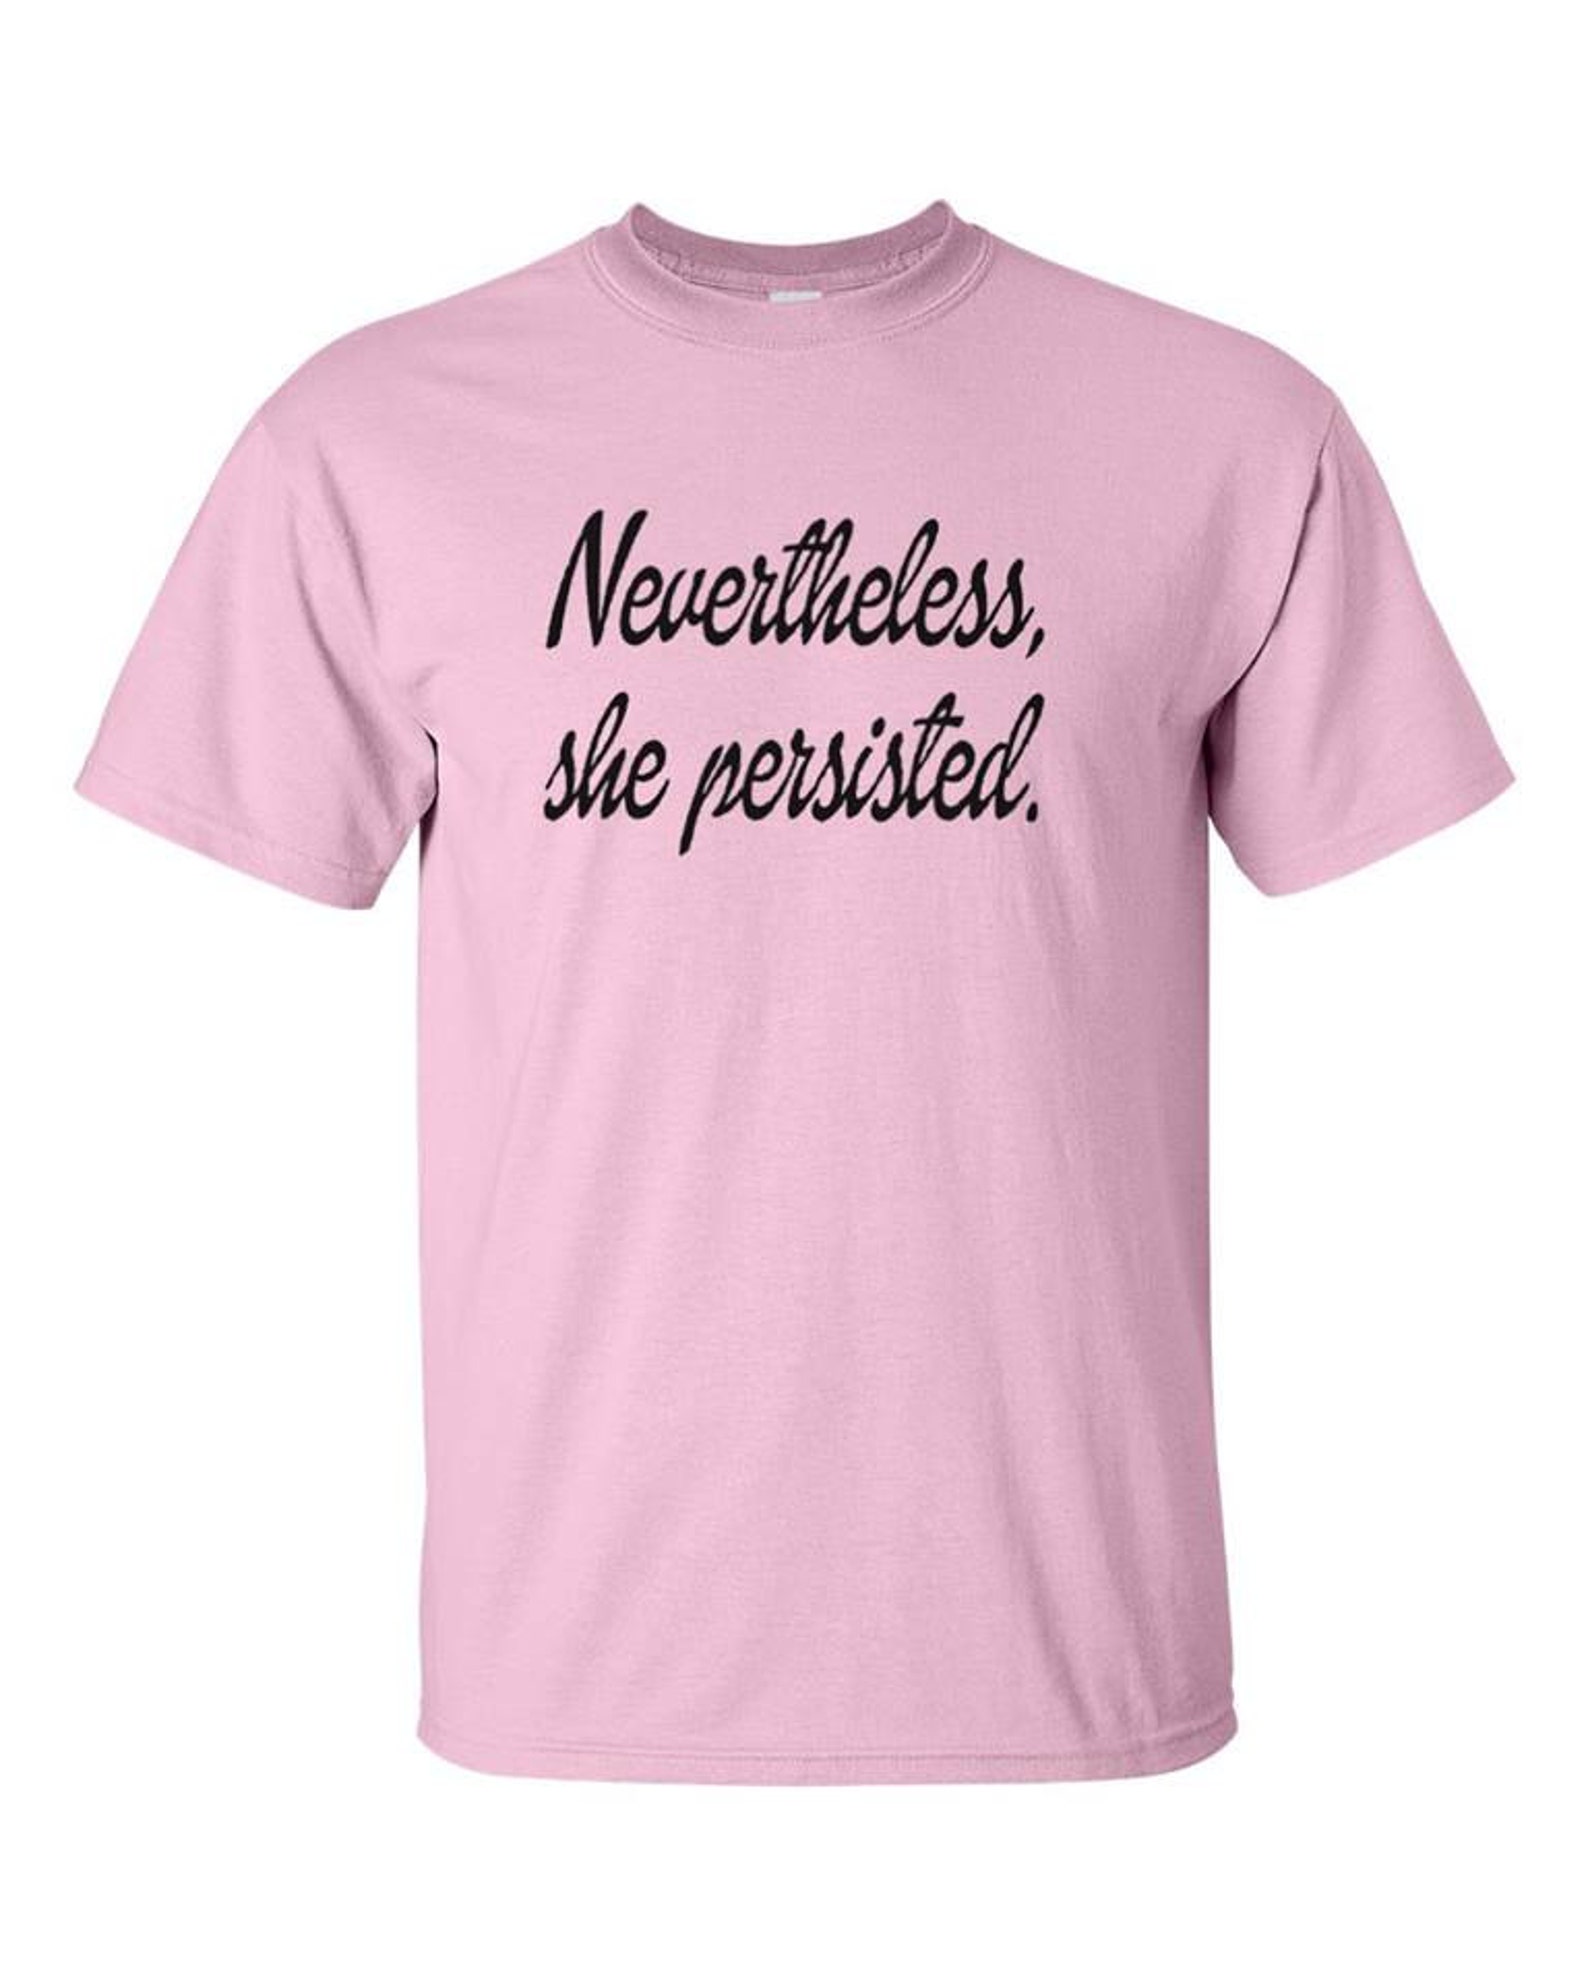 Nevertheless She Persisted. New Feminist Rally Cry | Etsy